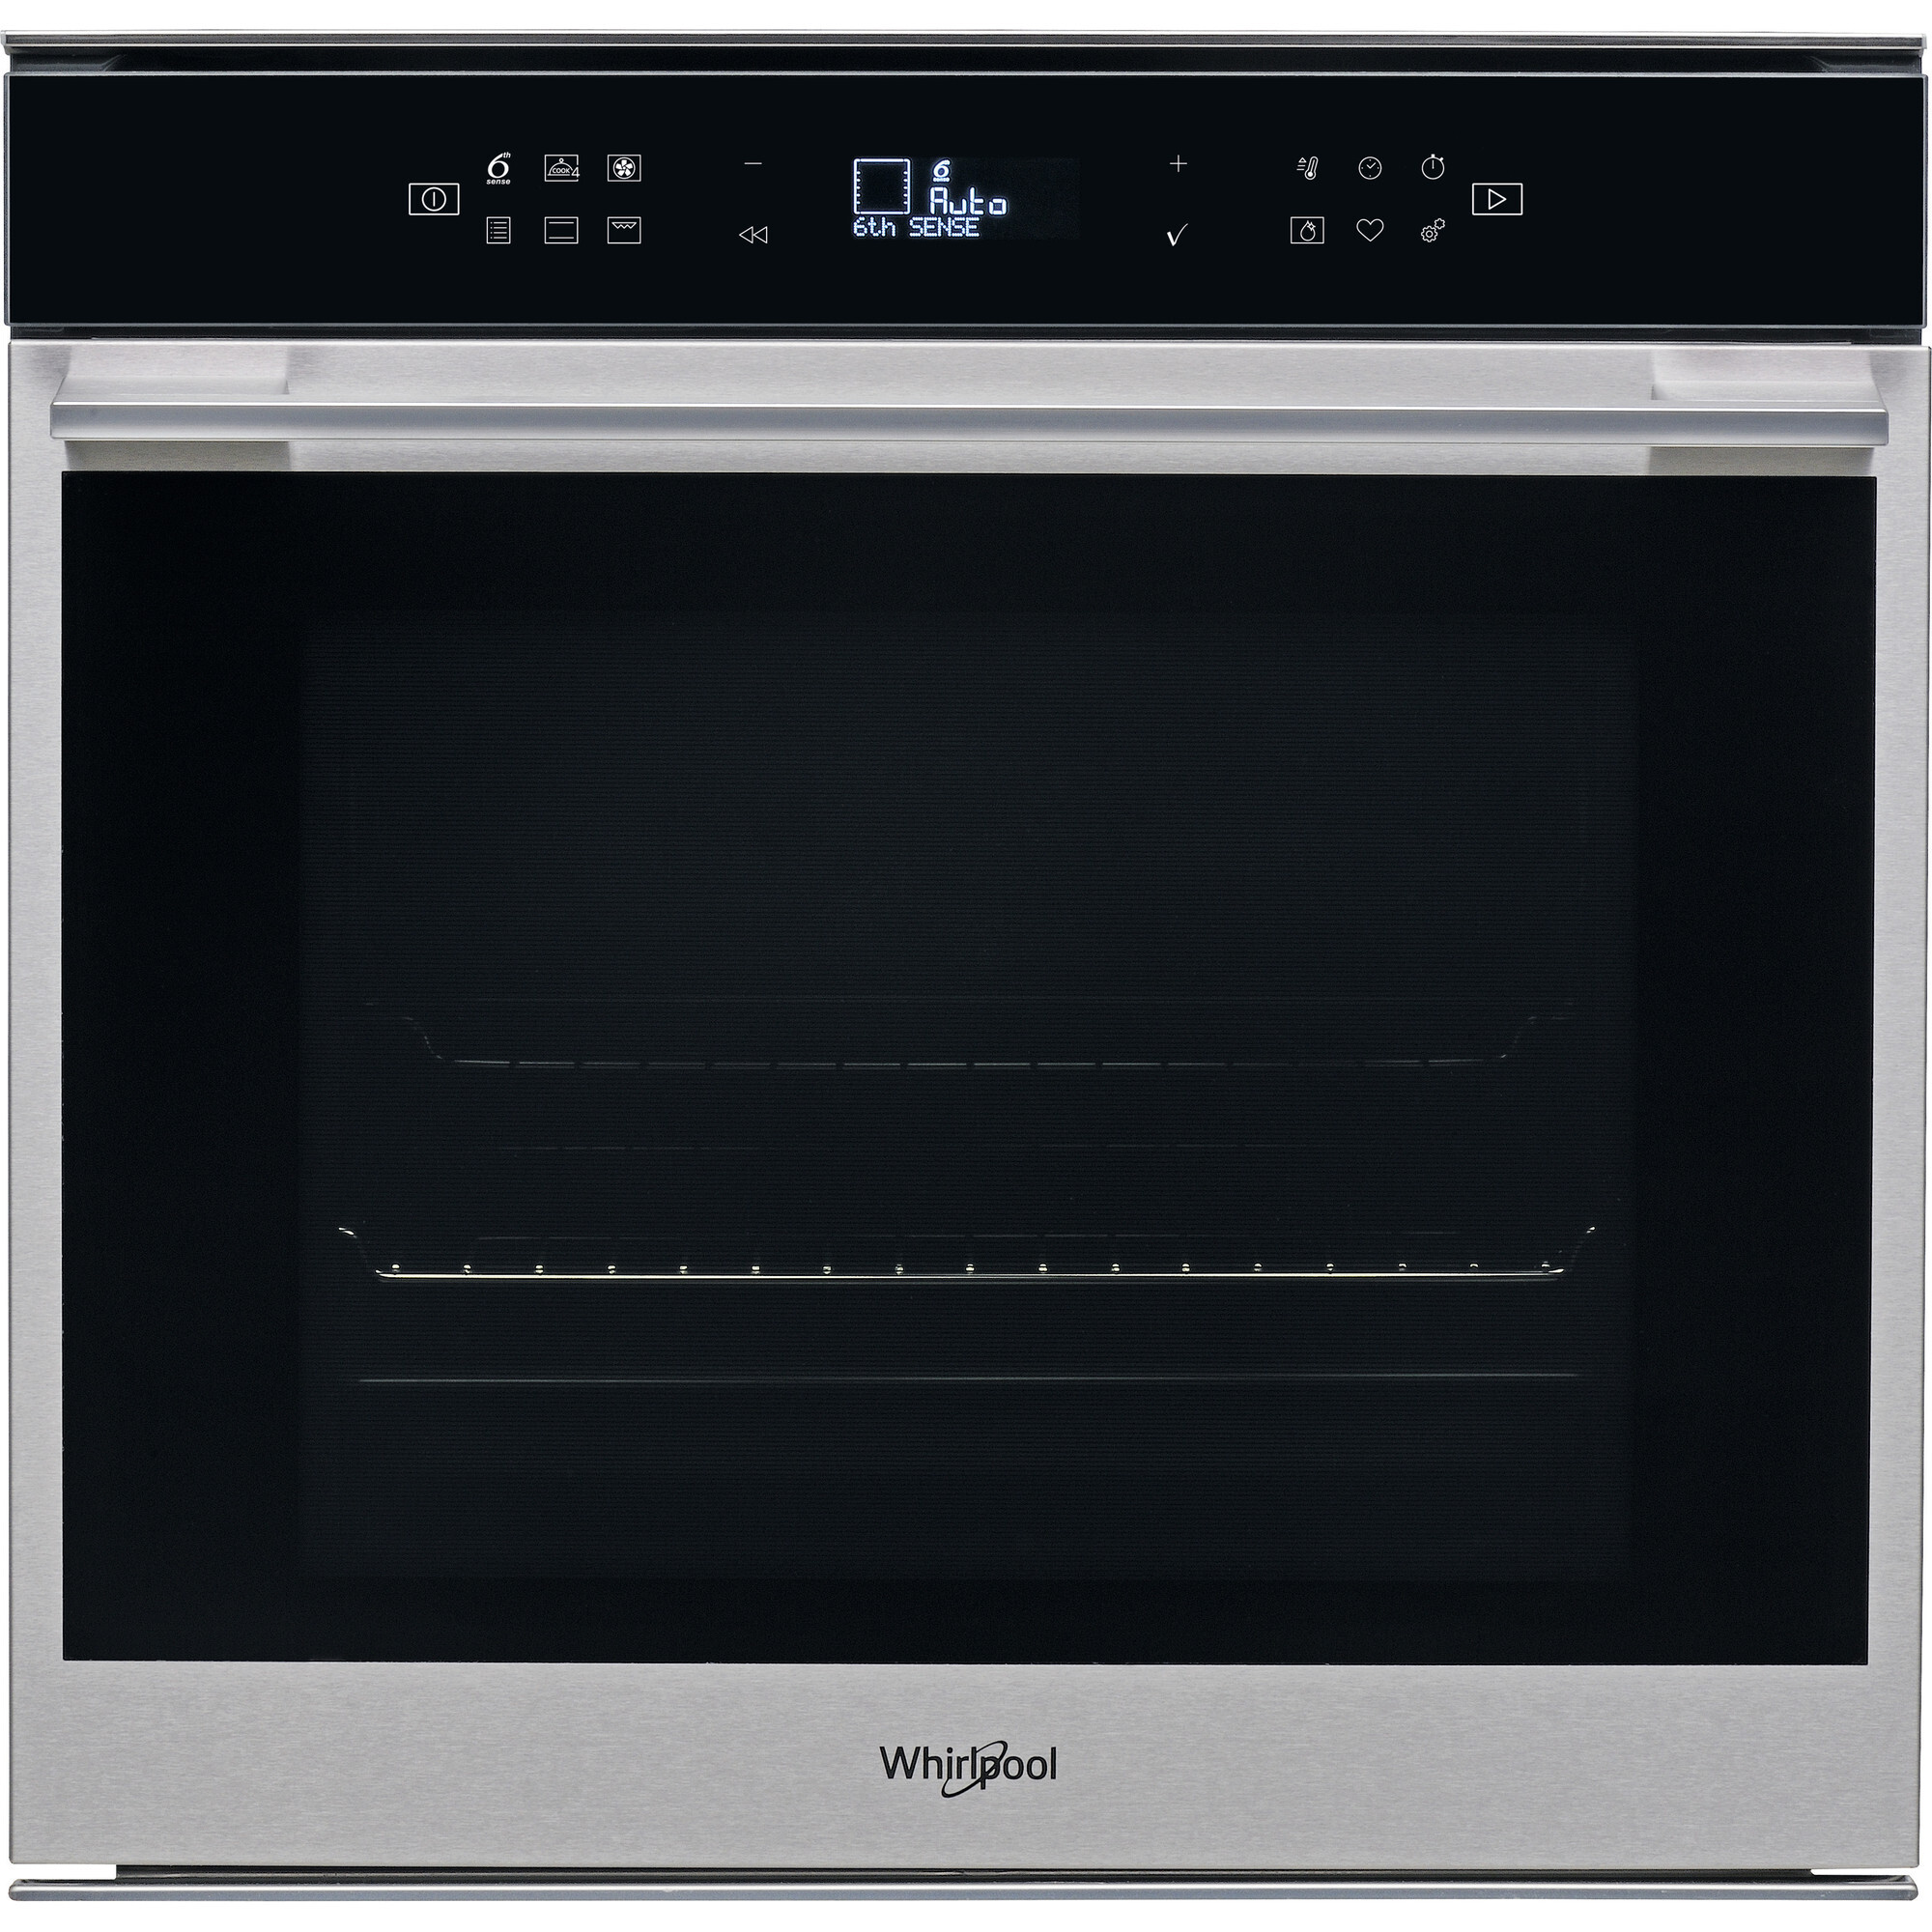 Whirlpool  W7 OM4 4S1 H OVEN WP